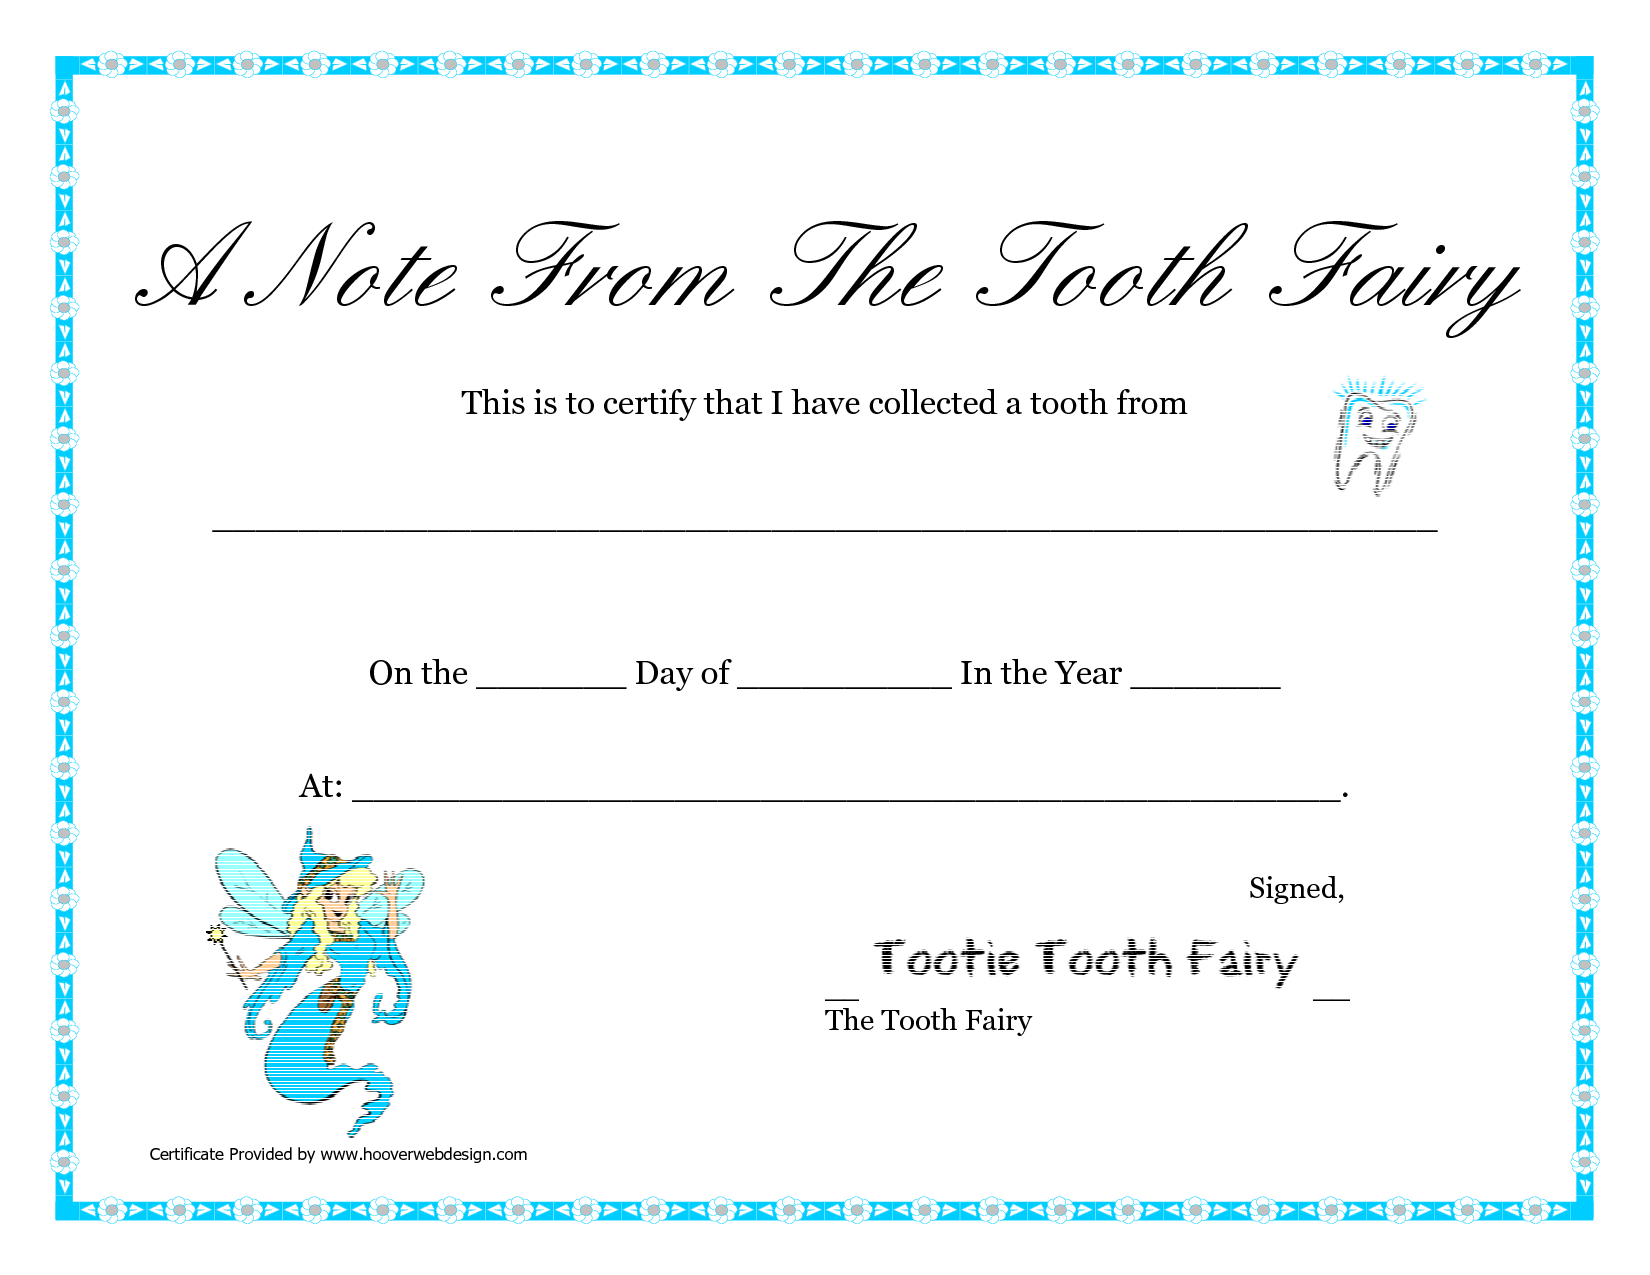 Free Printable Tooth Fairy Letter | Tooth Fairy Certificate - Tooth Fairy Stationery Free Printable